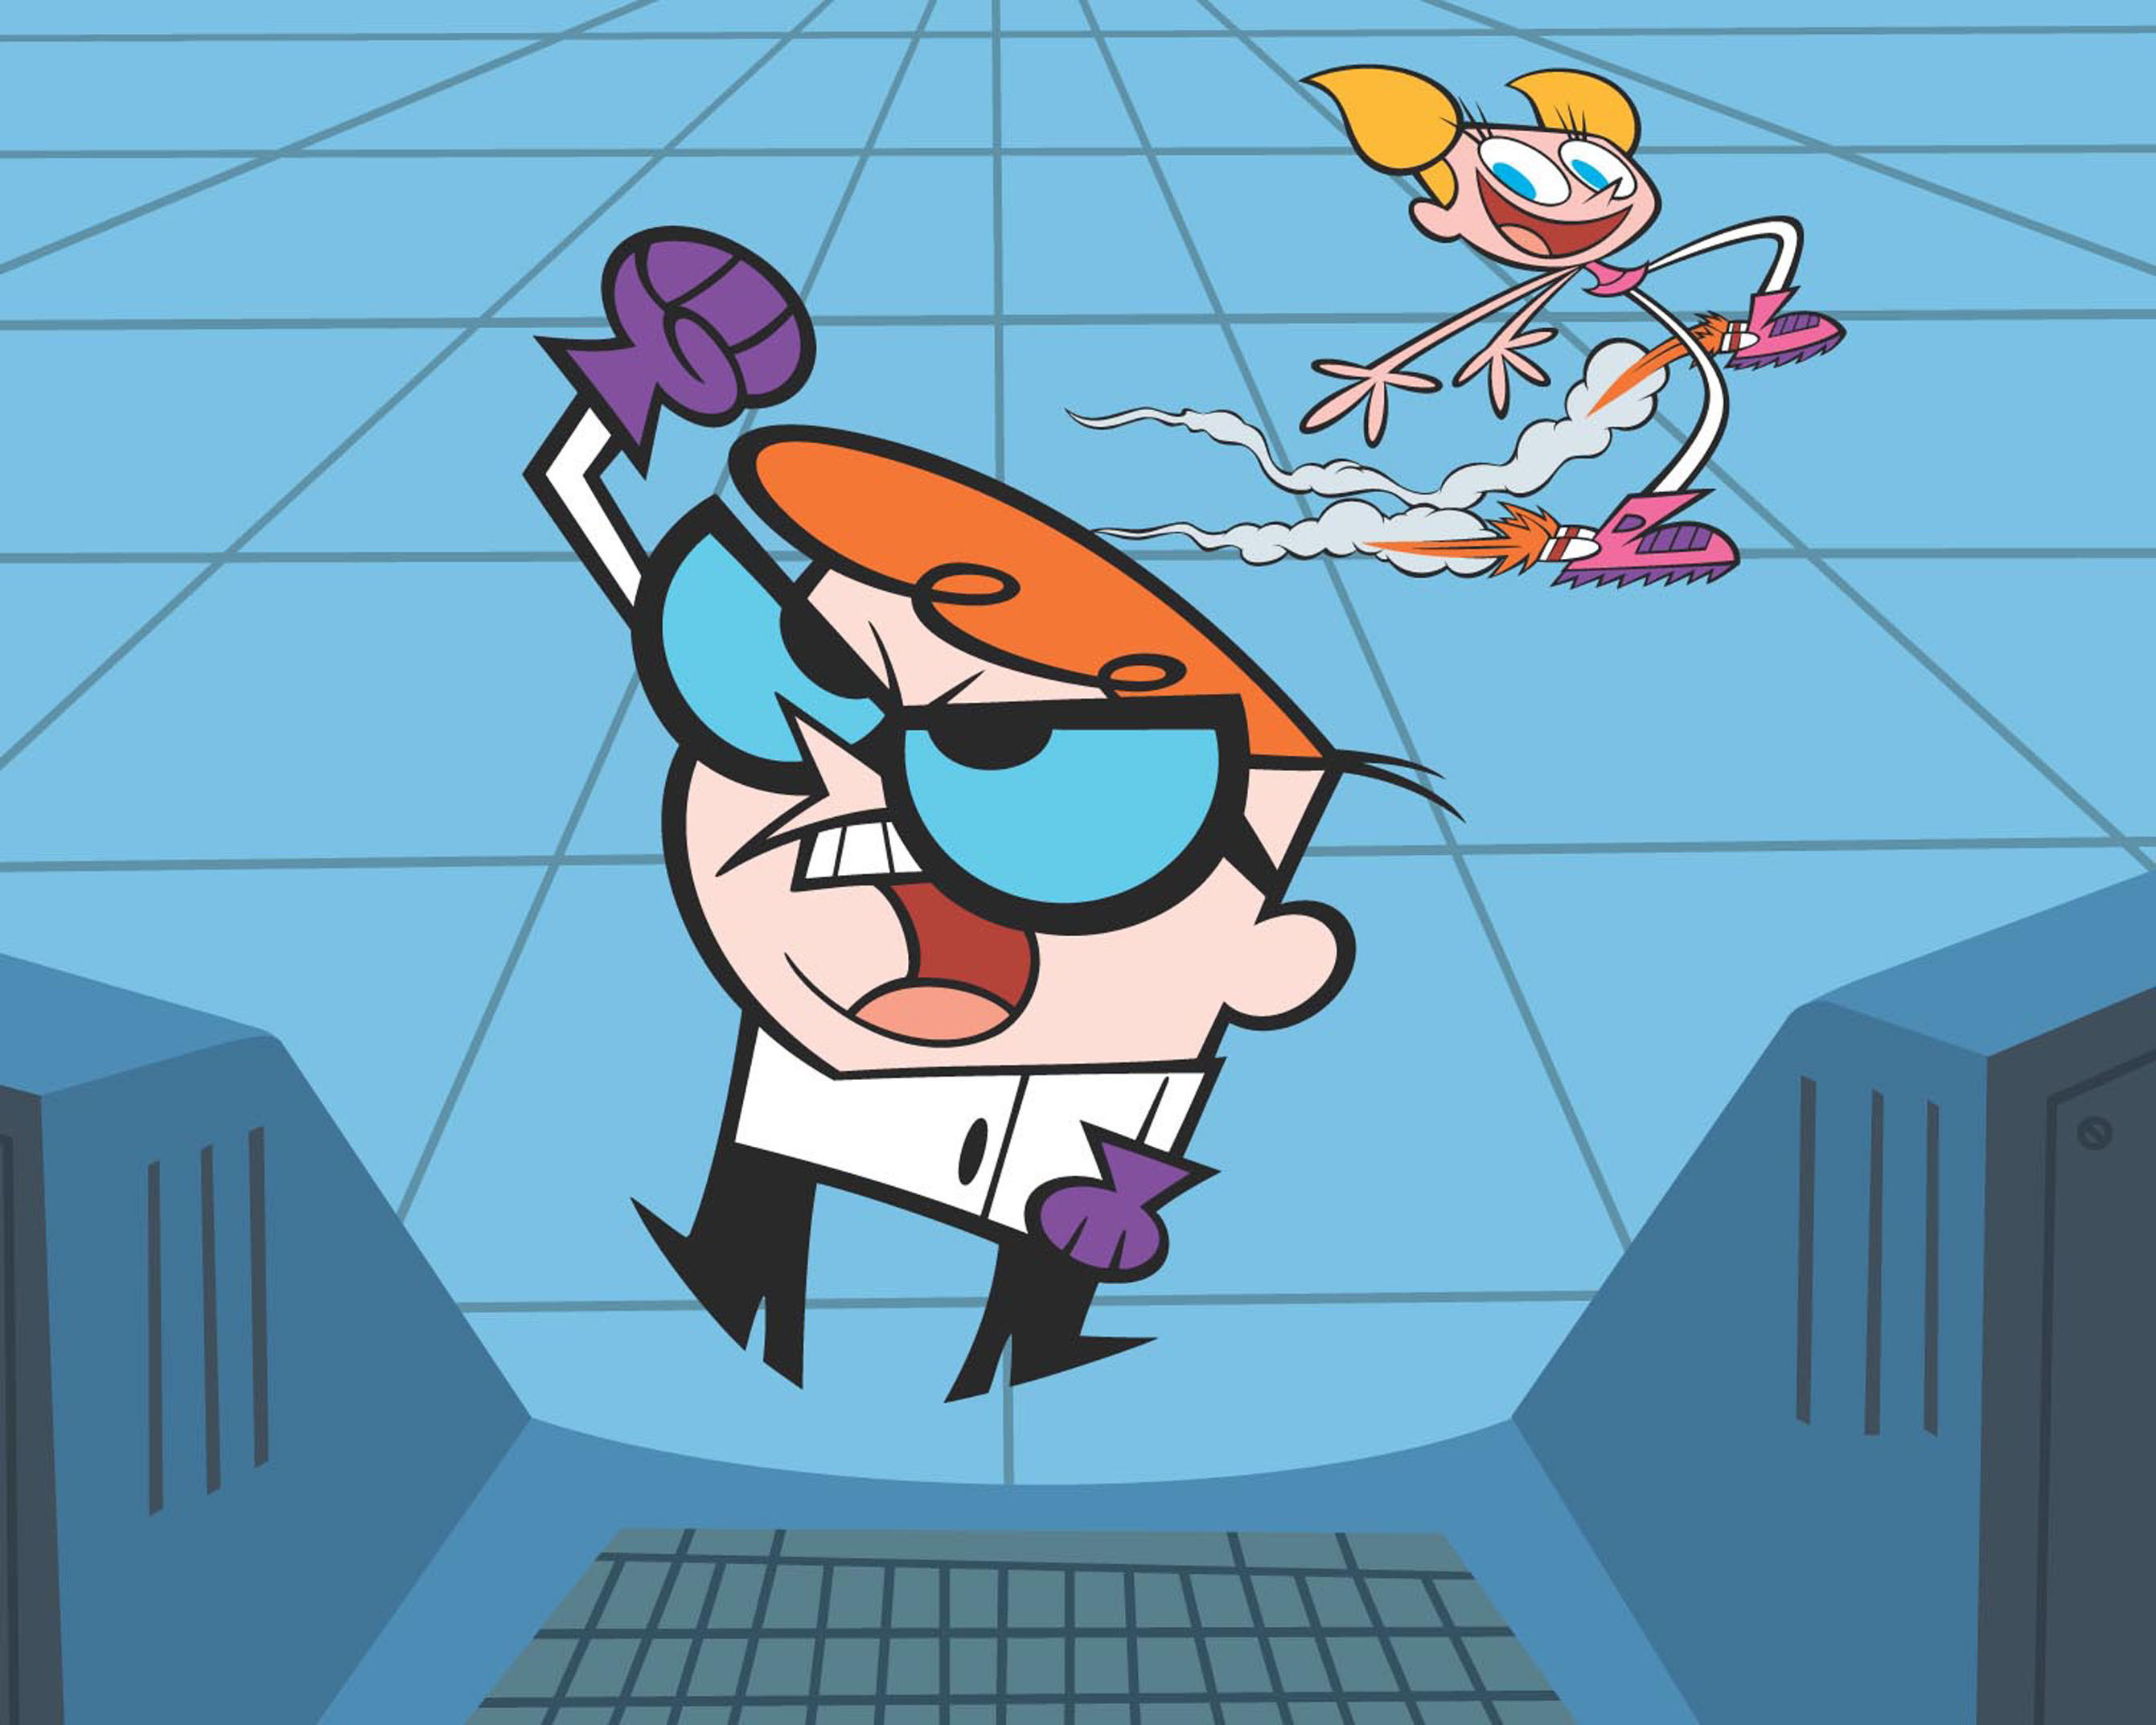 Dexter, small redheaded boy, angrily raises a fist while Dee Dee skates happily in the back